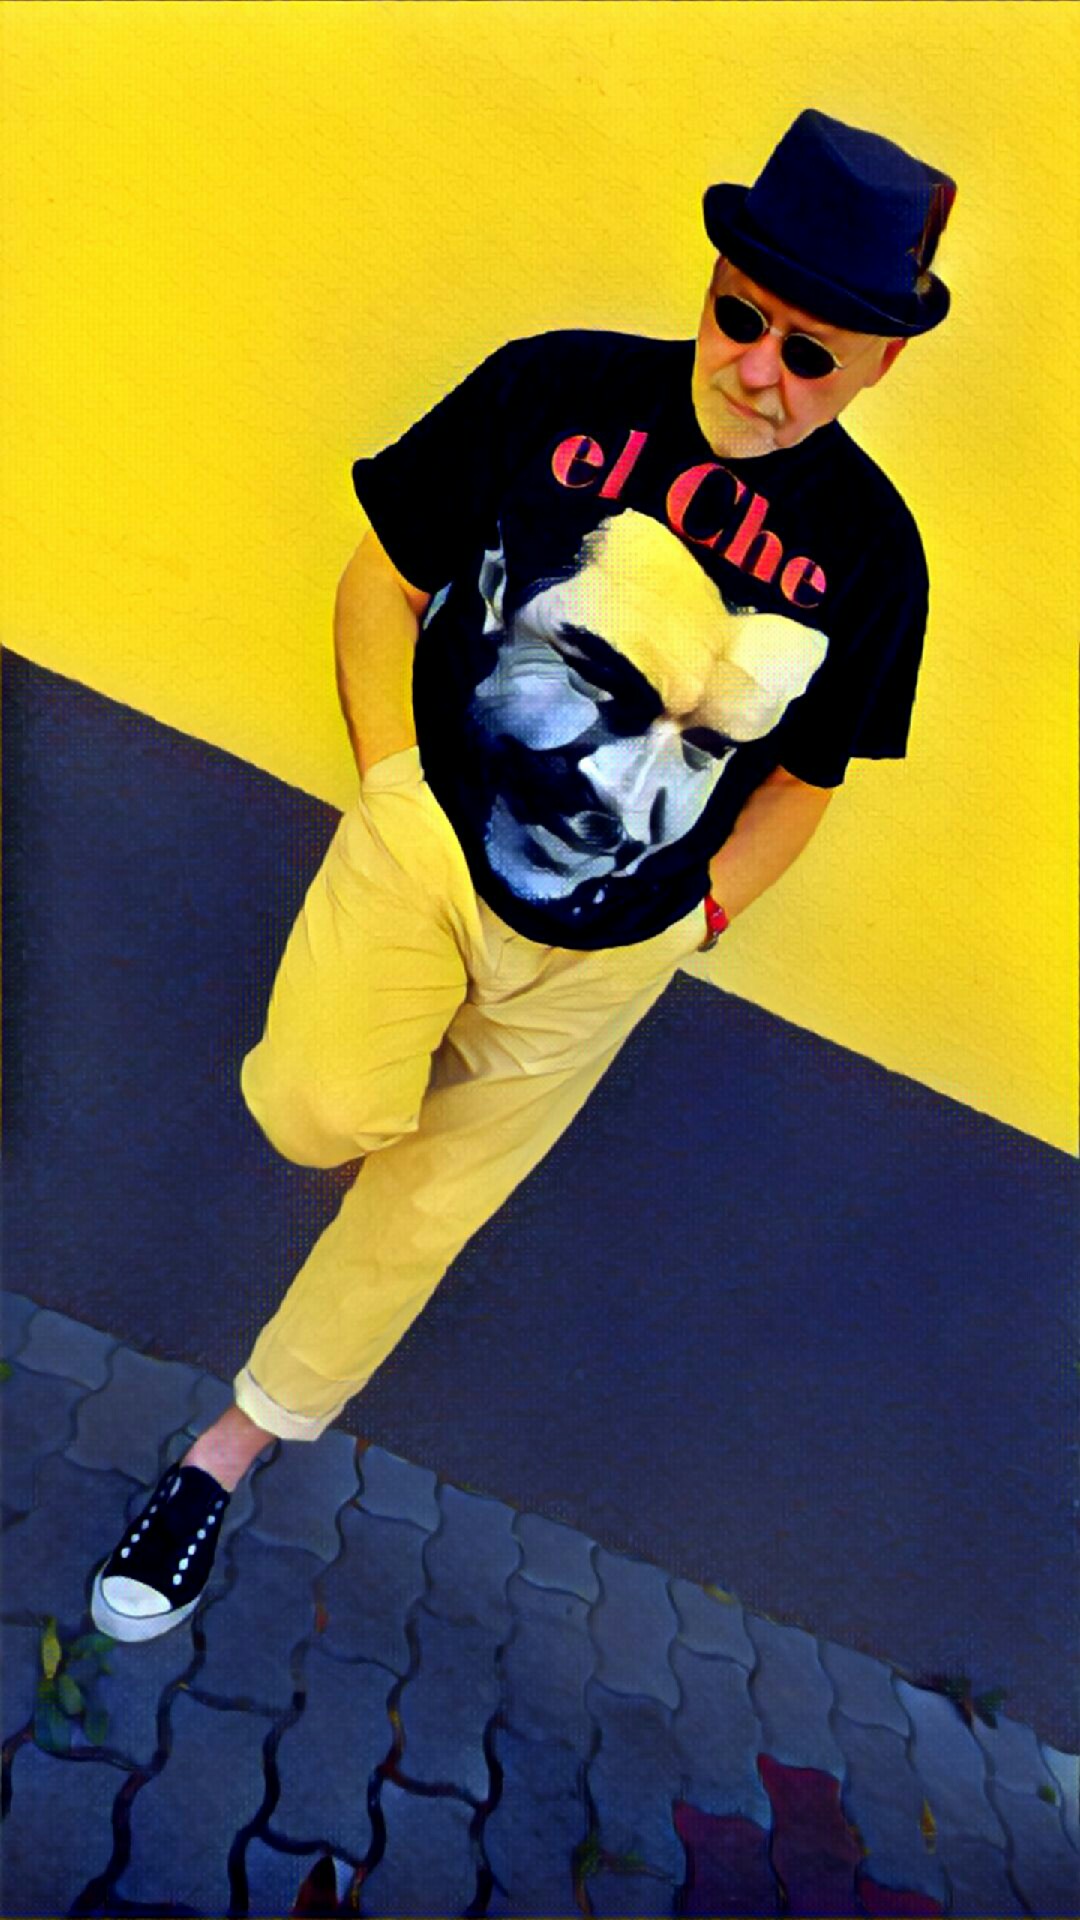 Che and the yellow trousers